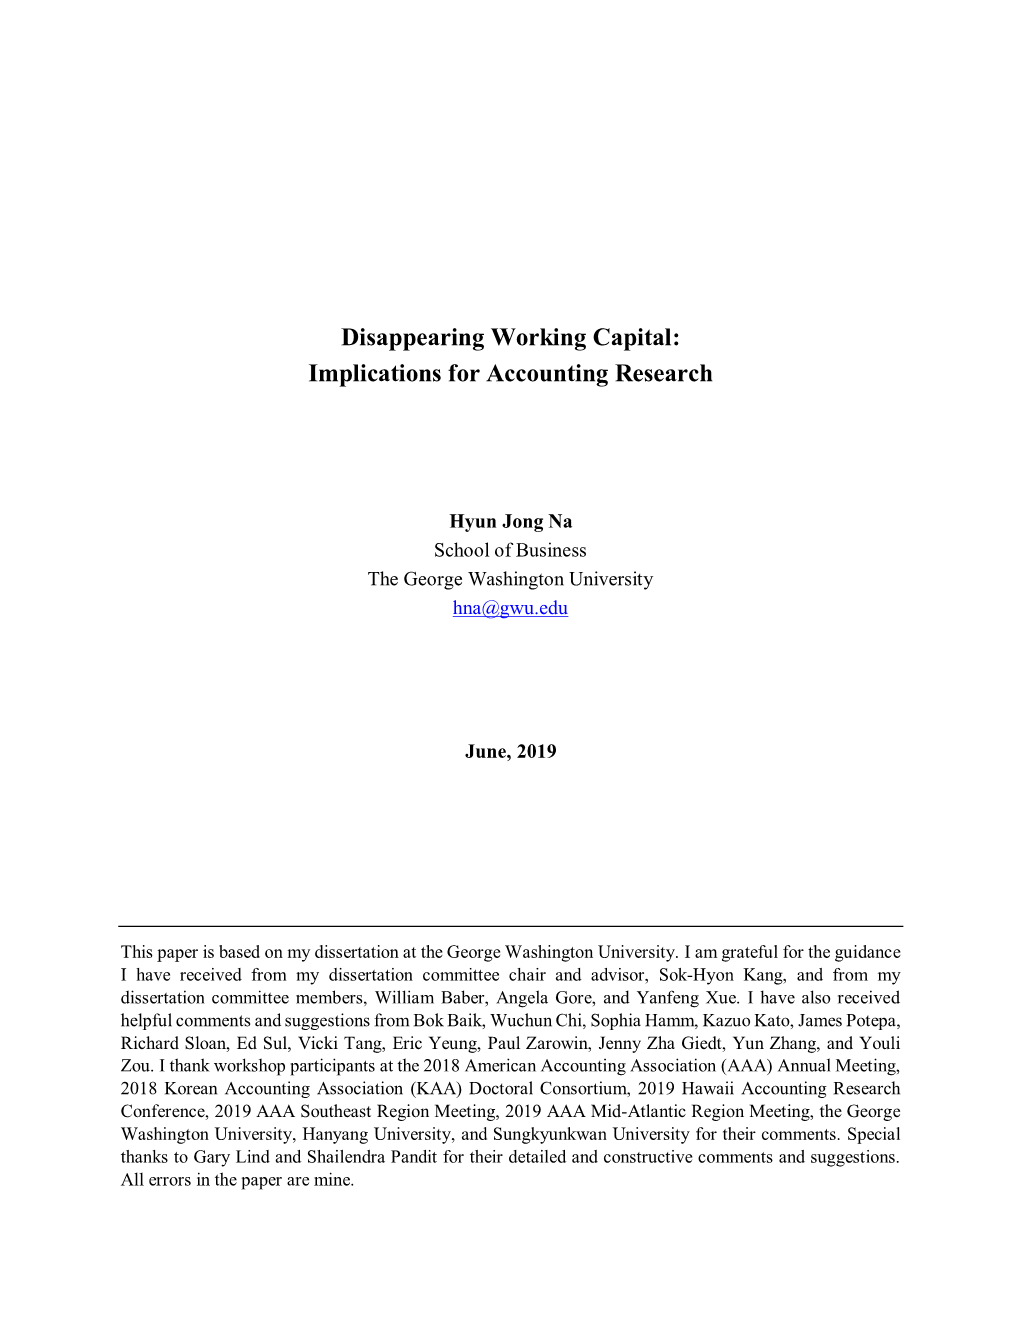 Disappearing Working Capital: Implications for Accounting Research